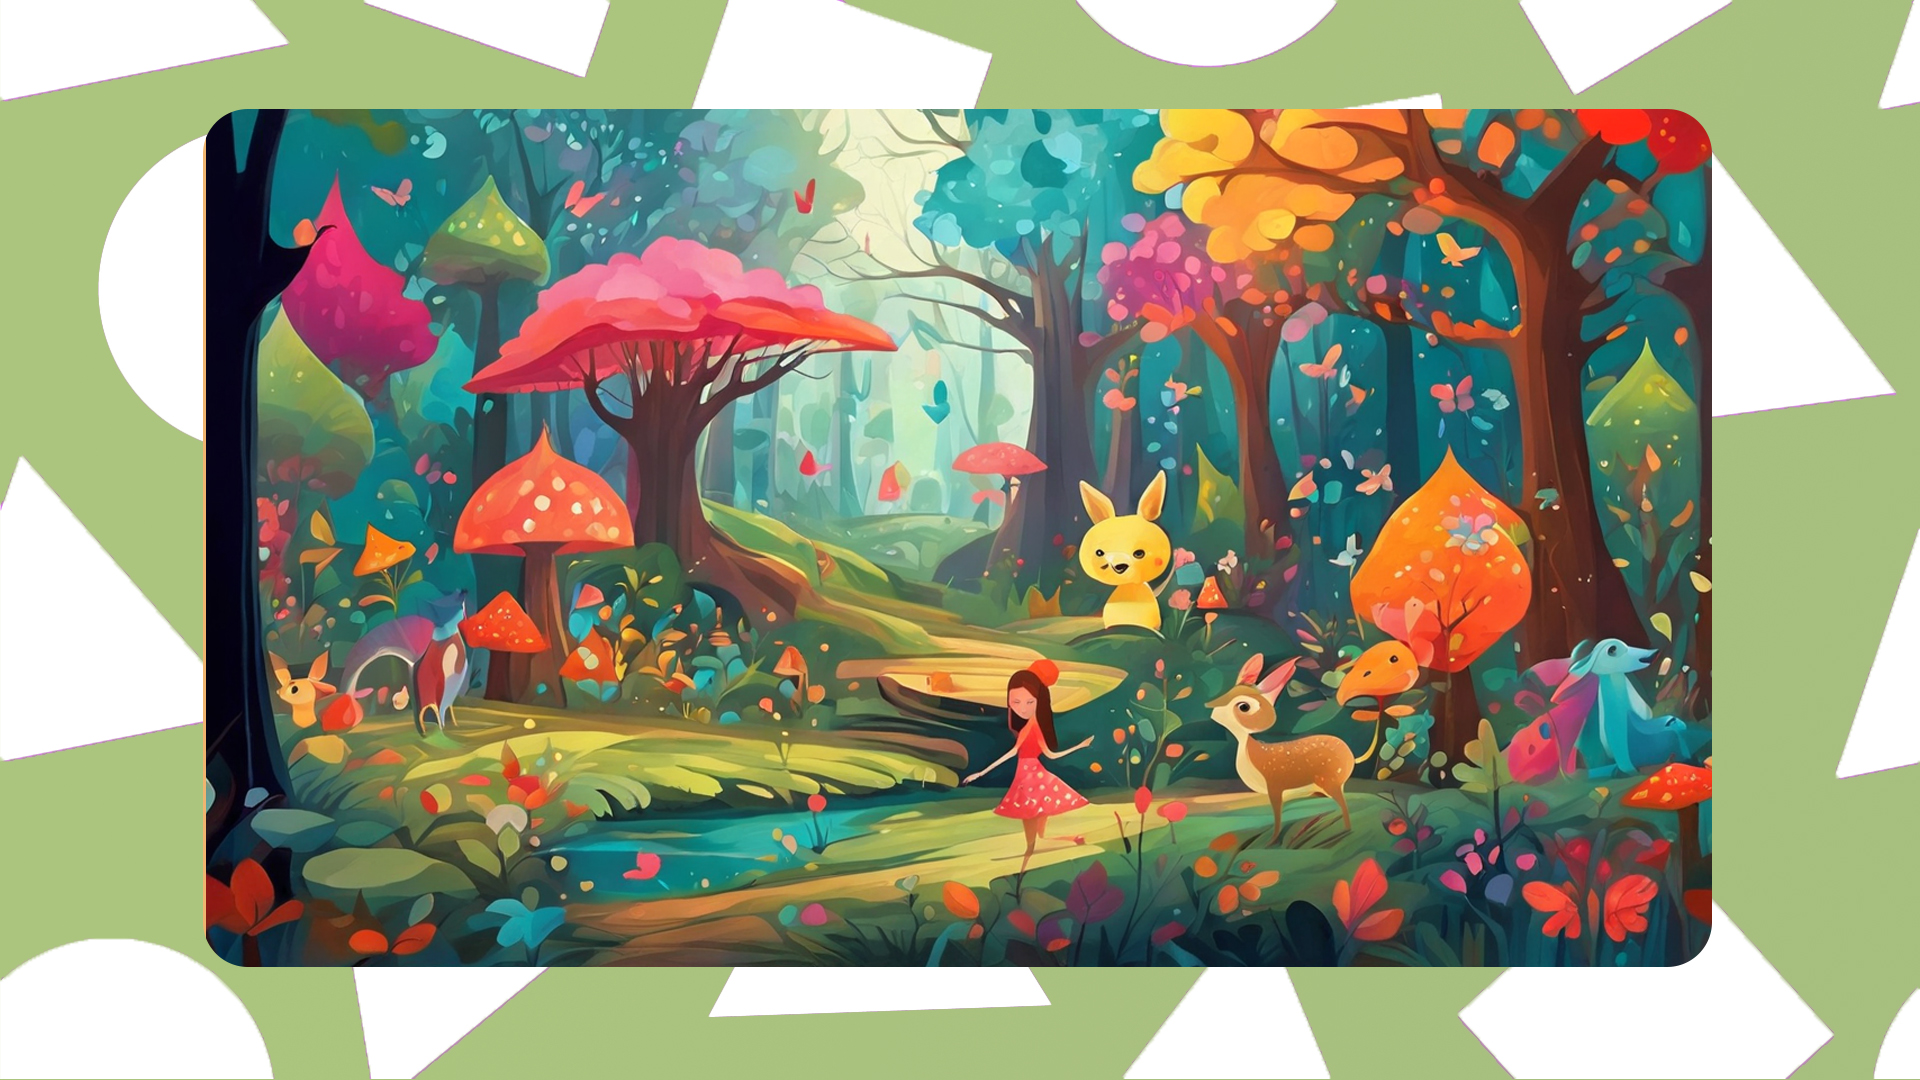 whimsical forest filled with magical creatures